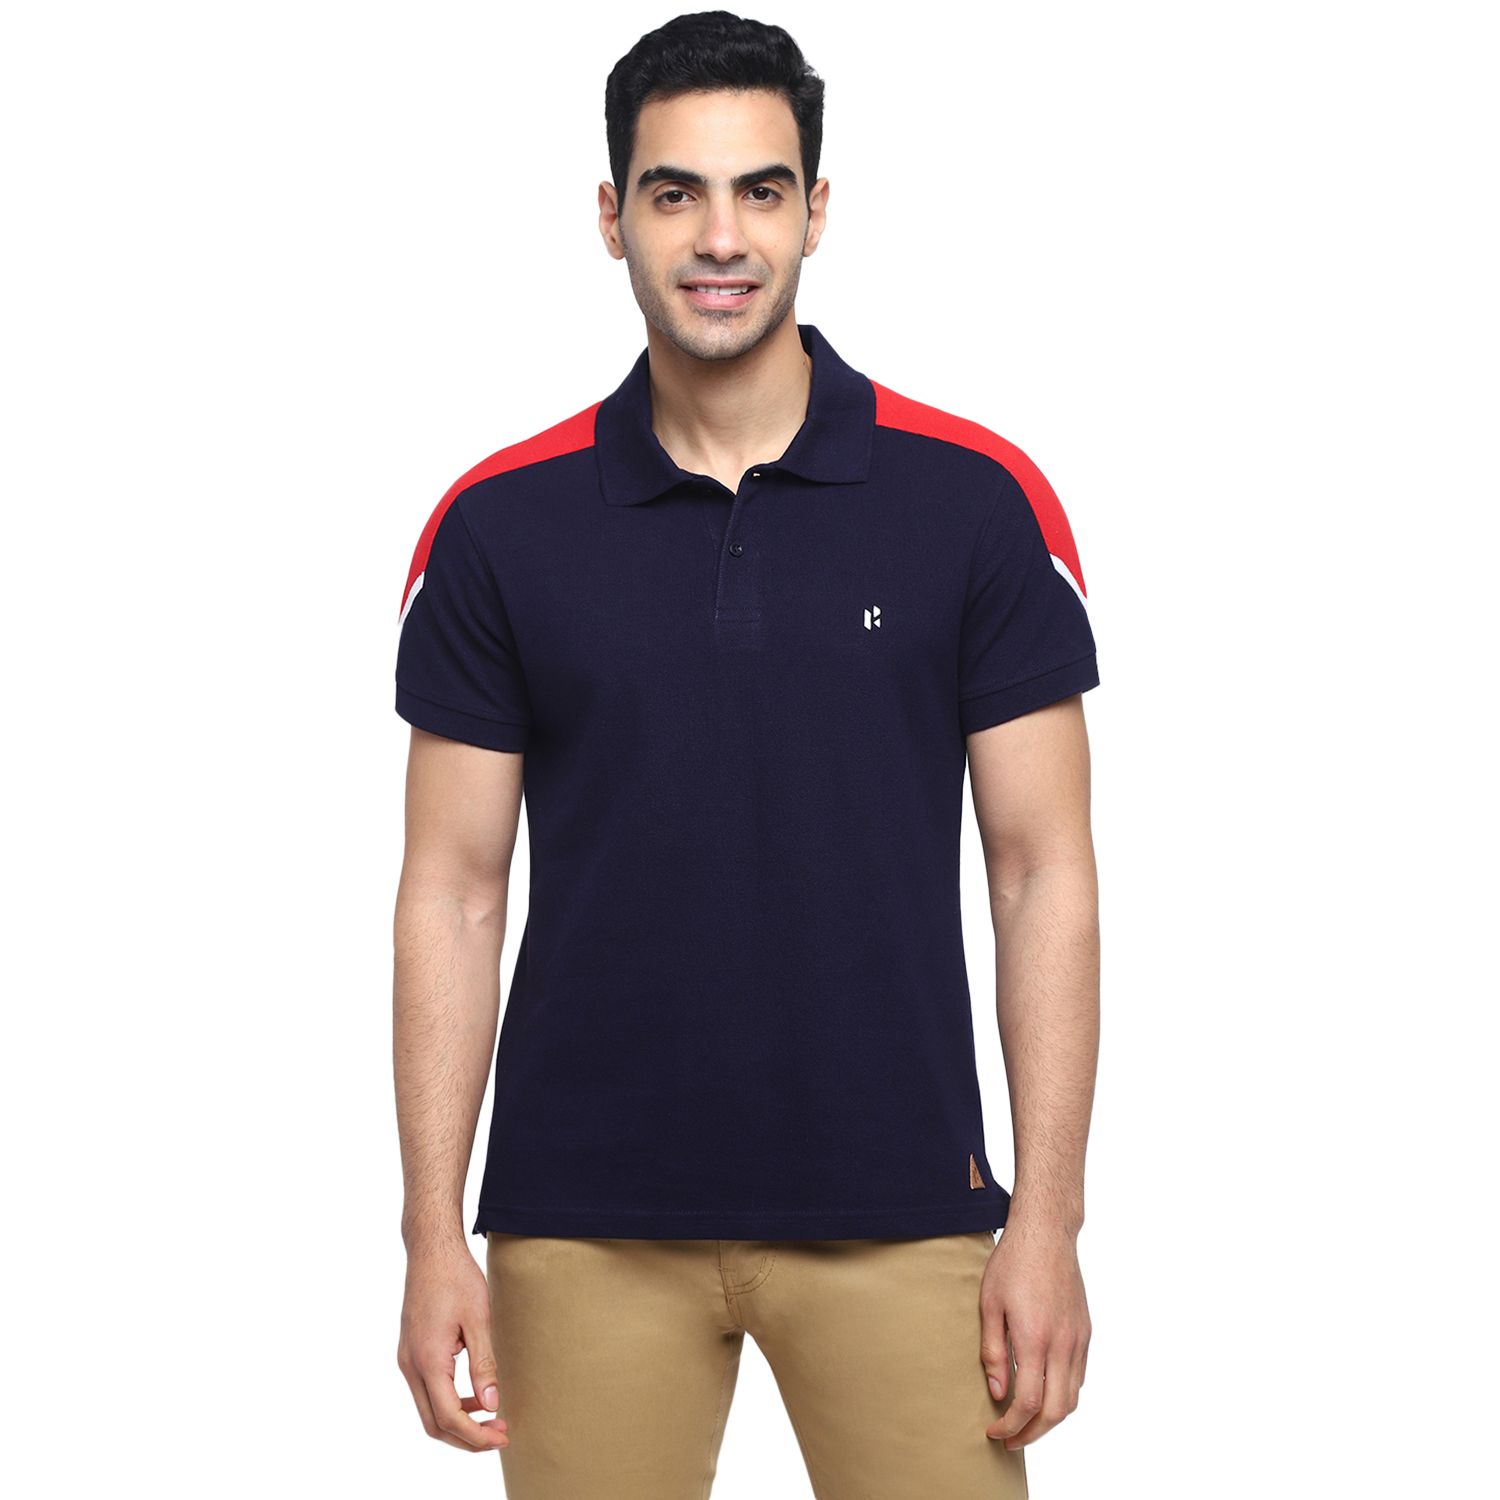 HERO OFFICIAL MENS CLASSIC POLO T-SHIRT